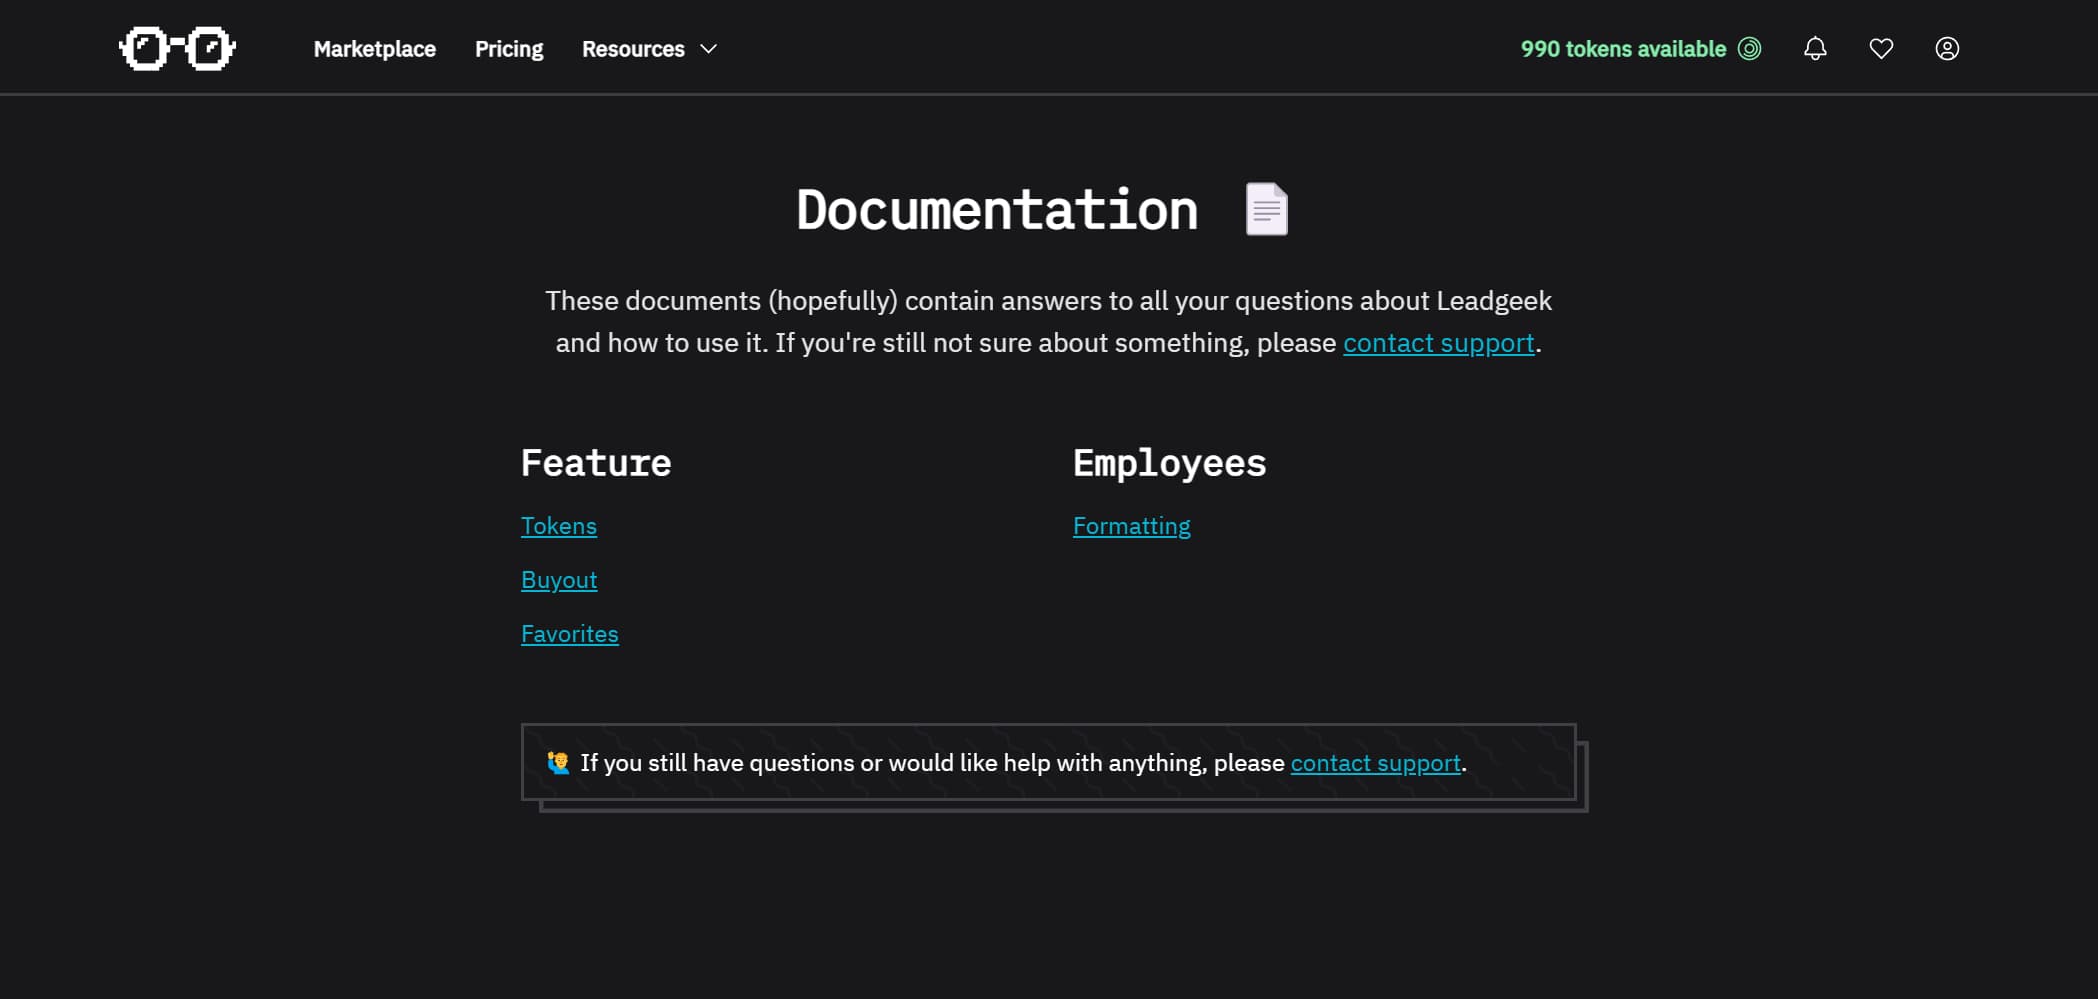 The documentation page